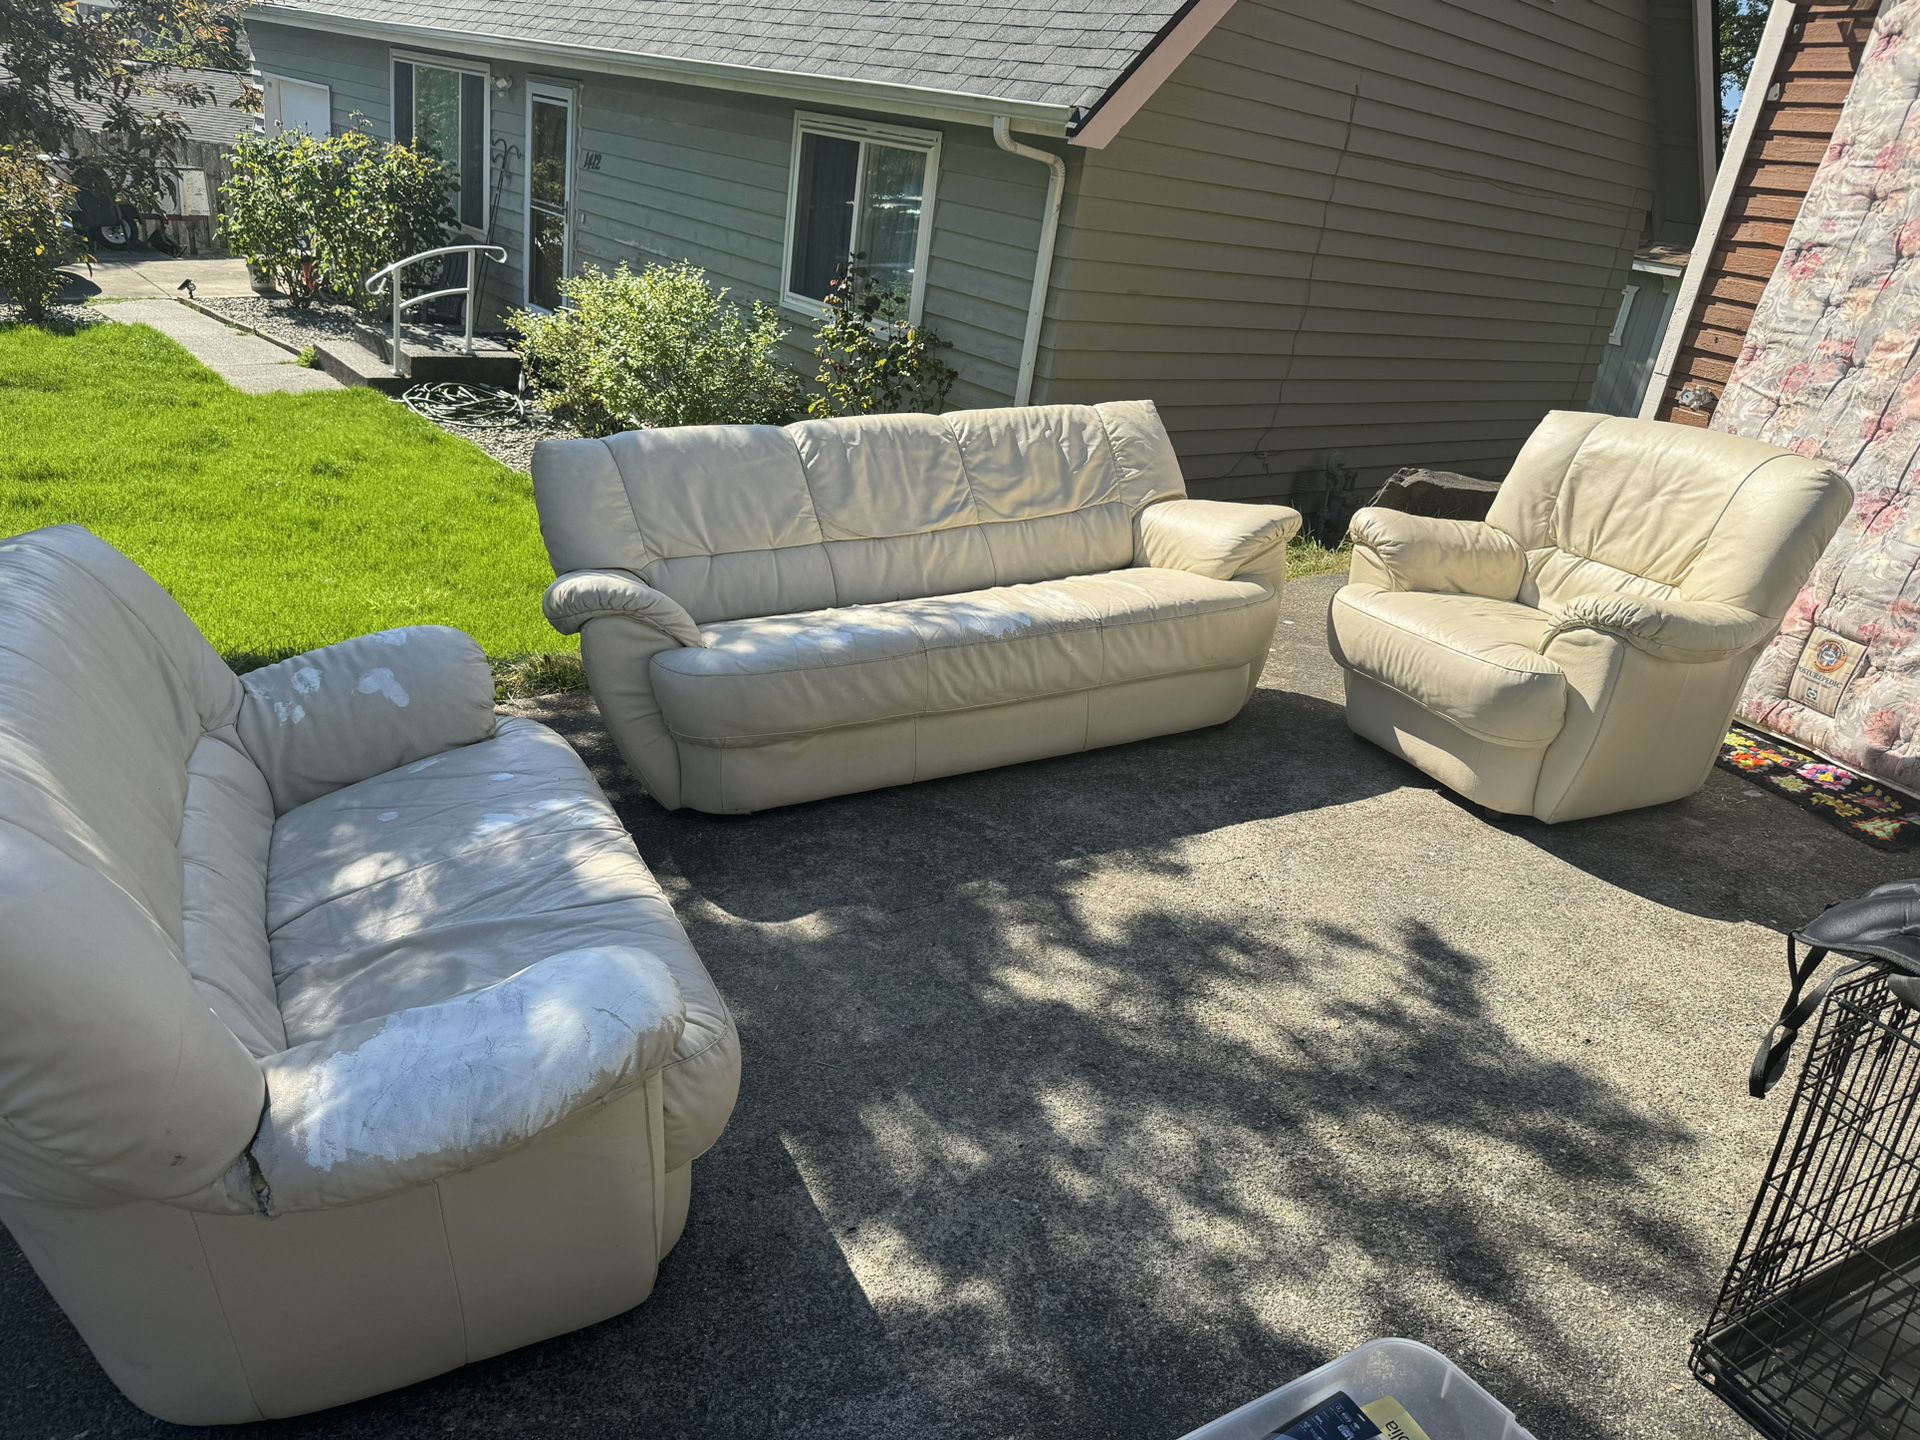 3 Piece Leather Couches 